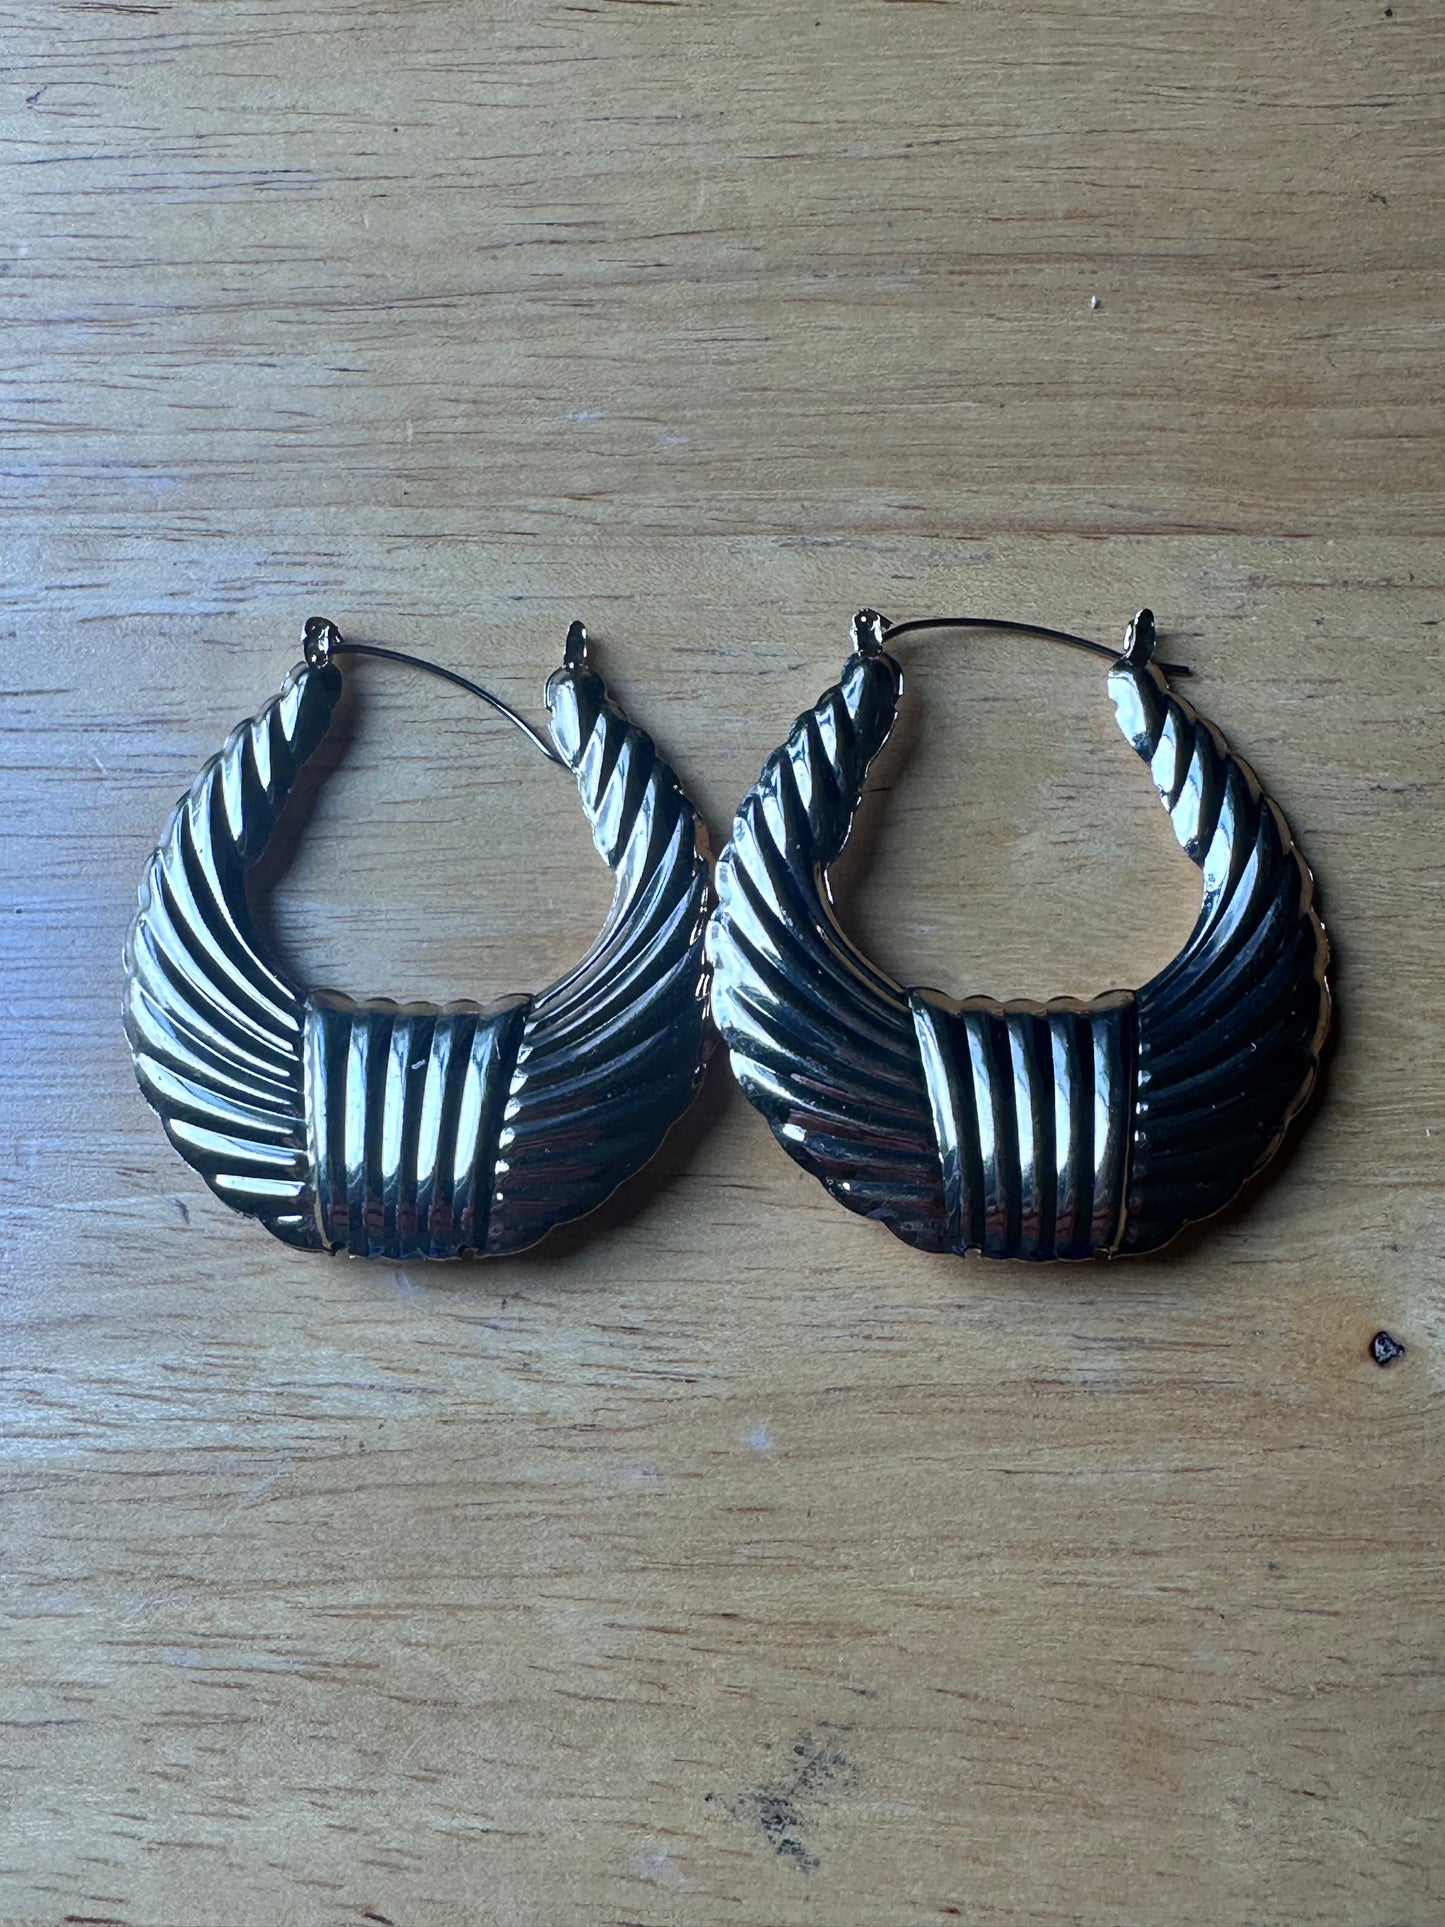 MAD MEN: Joan Harris' Vintage Traditional Earring Style Collection